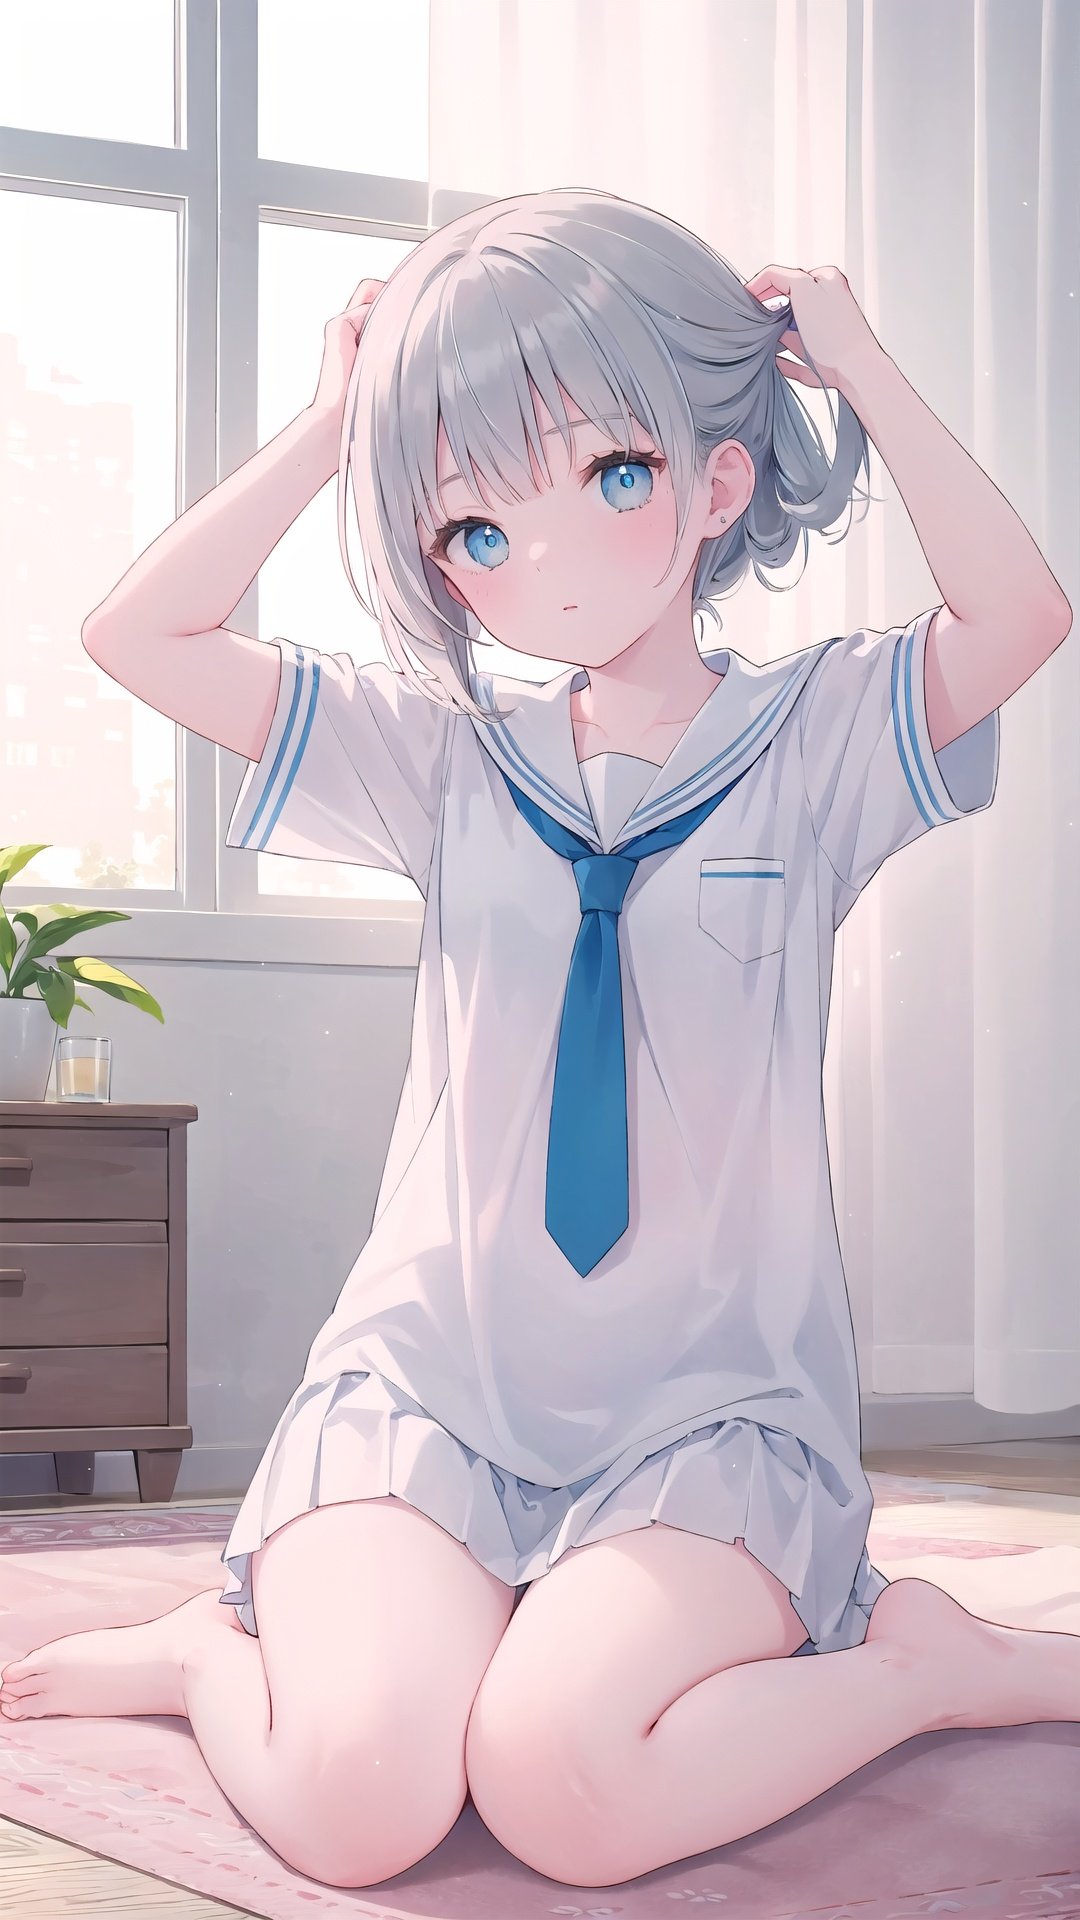 finely detail,Depth of field,(((masterpiece))),((extremely detailed CG unity 8k wallpaper)),best quality,high resolution illustration,Amazing,intricate detail,(best illumination, best shadow, an extremely delicate and beautiful),dramatic angle,
hdr,1girl,young,long_hair,silver_hair,serafuku,white_shirt,arms_up,small_breasts,short_sleeves,solo,hands in hair,Sitting on the carpet,necktie,bare legs,barefoot,clavicle,
noon,Modernist style architecture,window,White curtains,bedroom,white carpet,ipad,sole